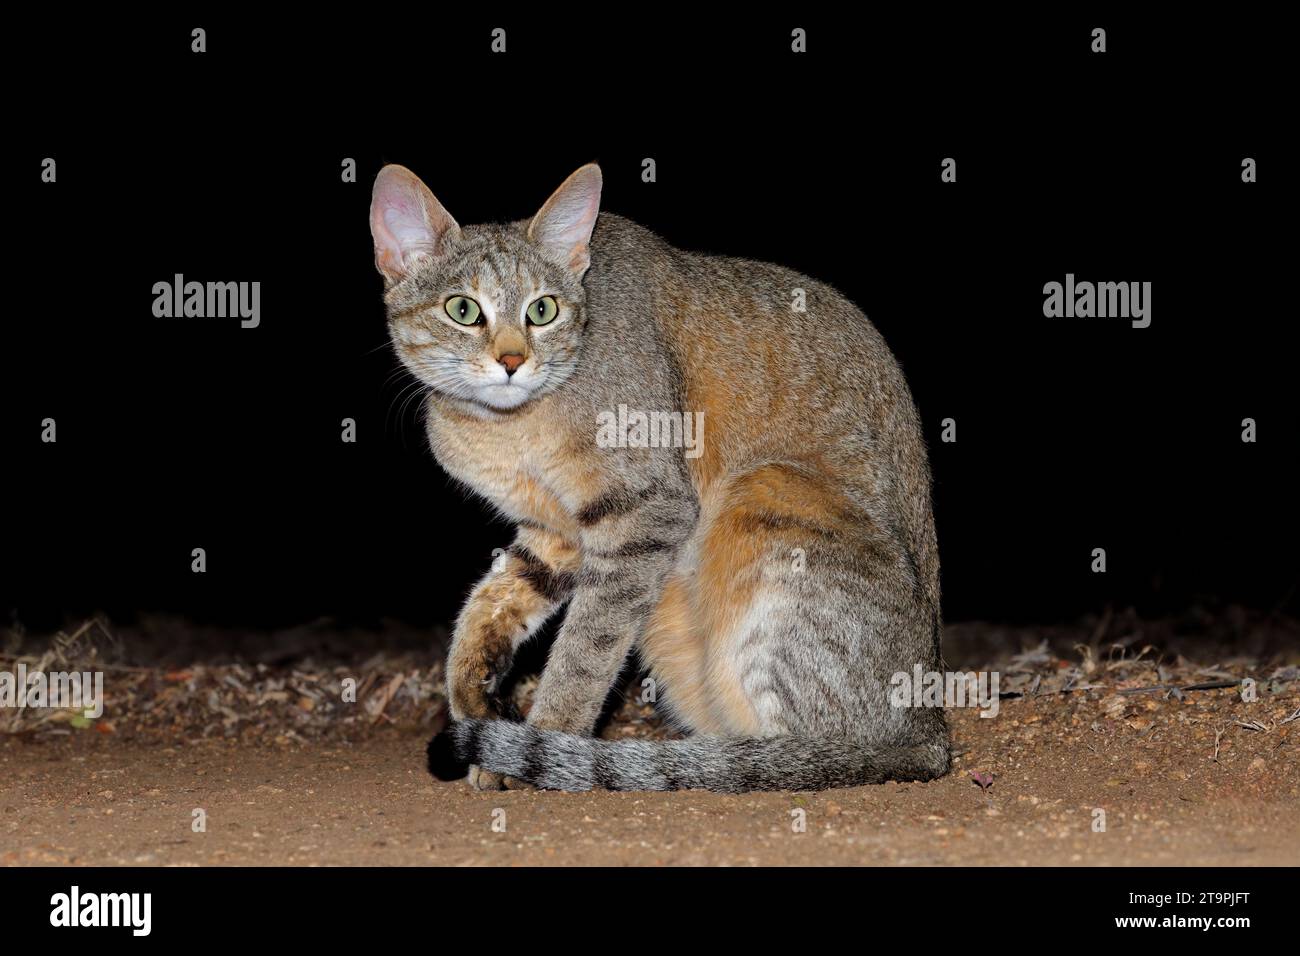 An African wild cat (Felis silvestris lybica) during the night, Kruger National Park, South Africa Stock Photo